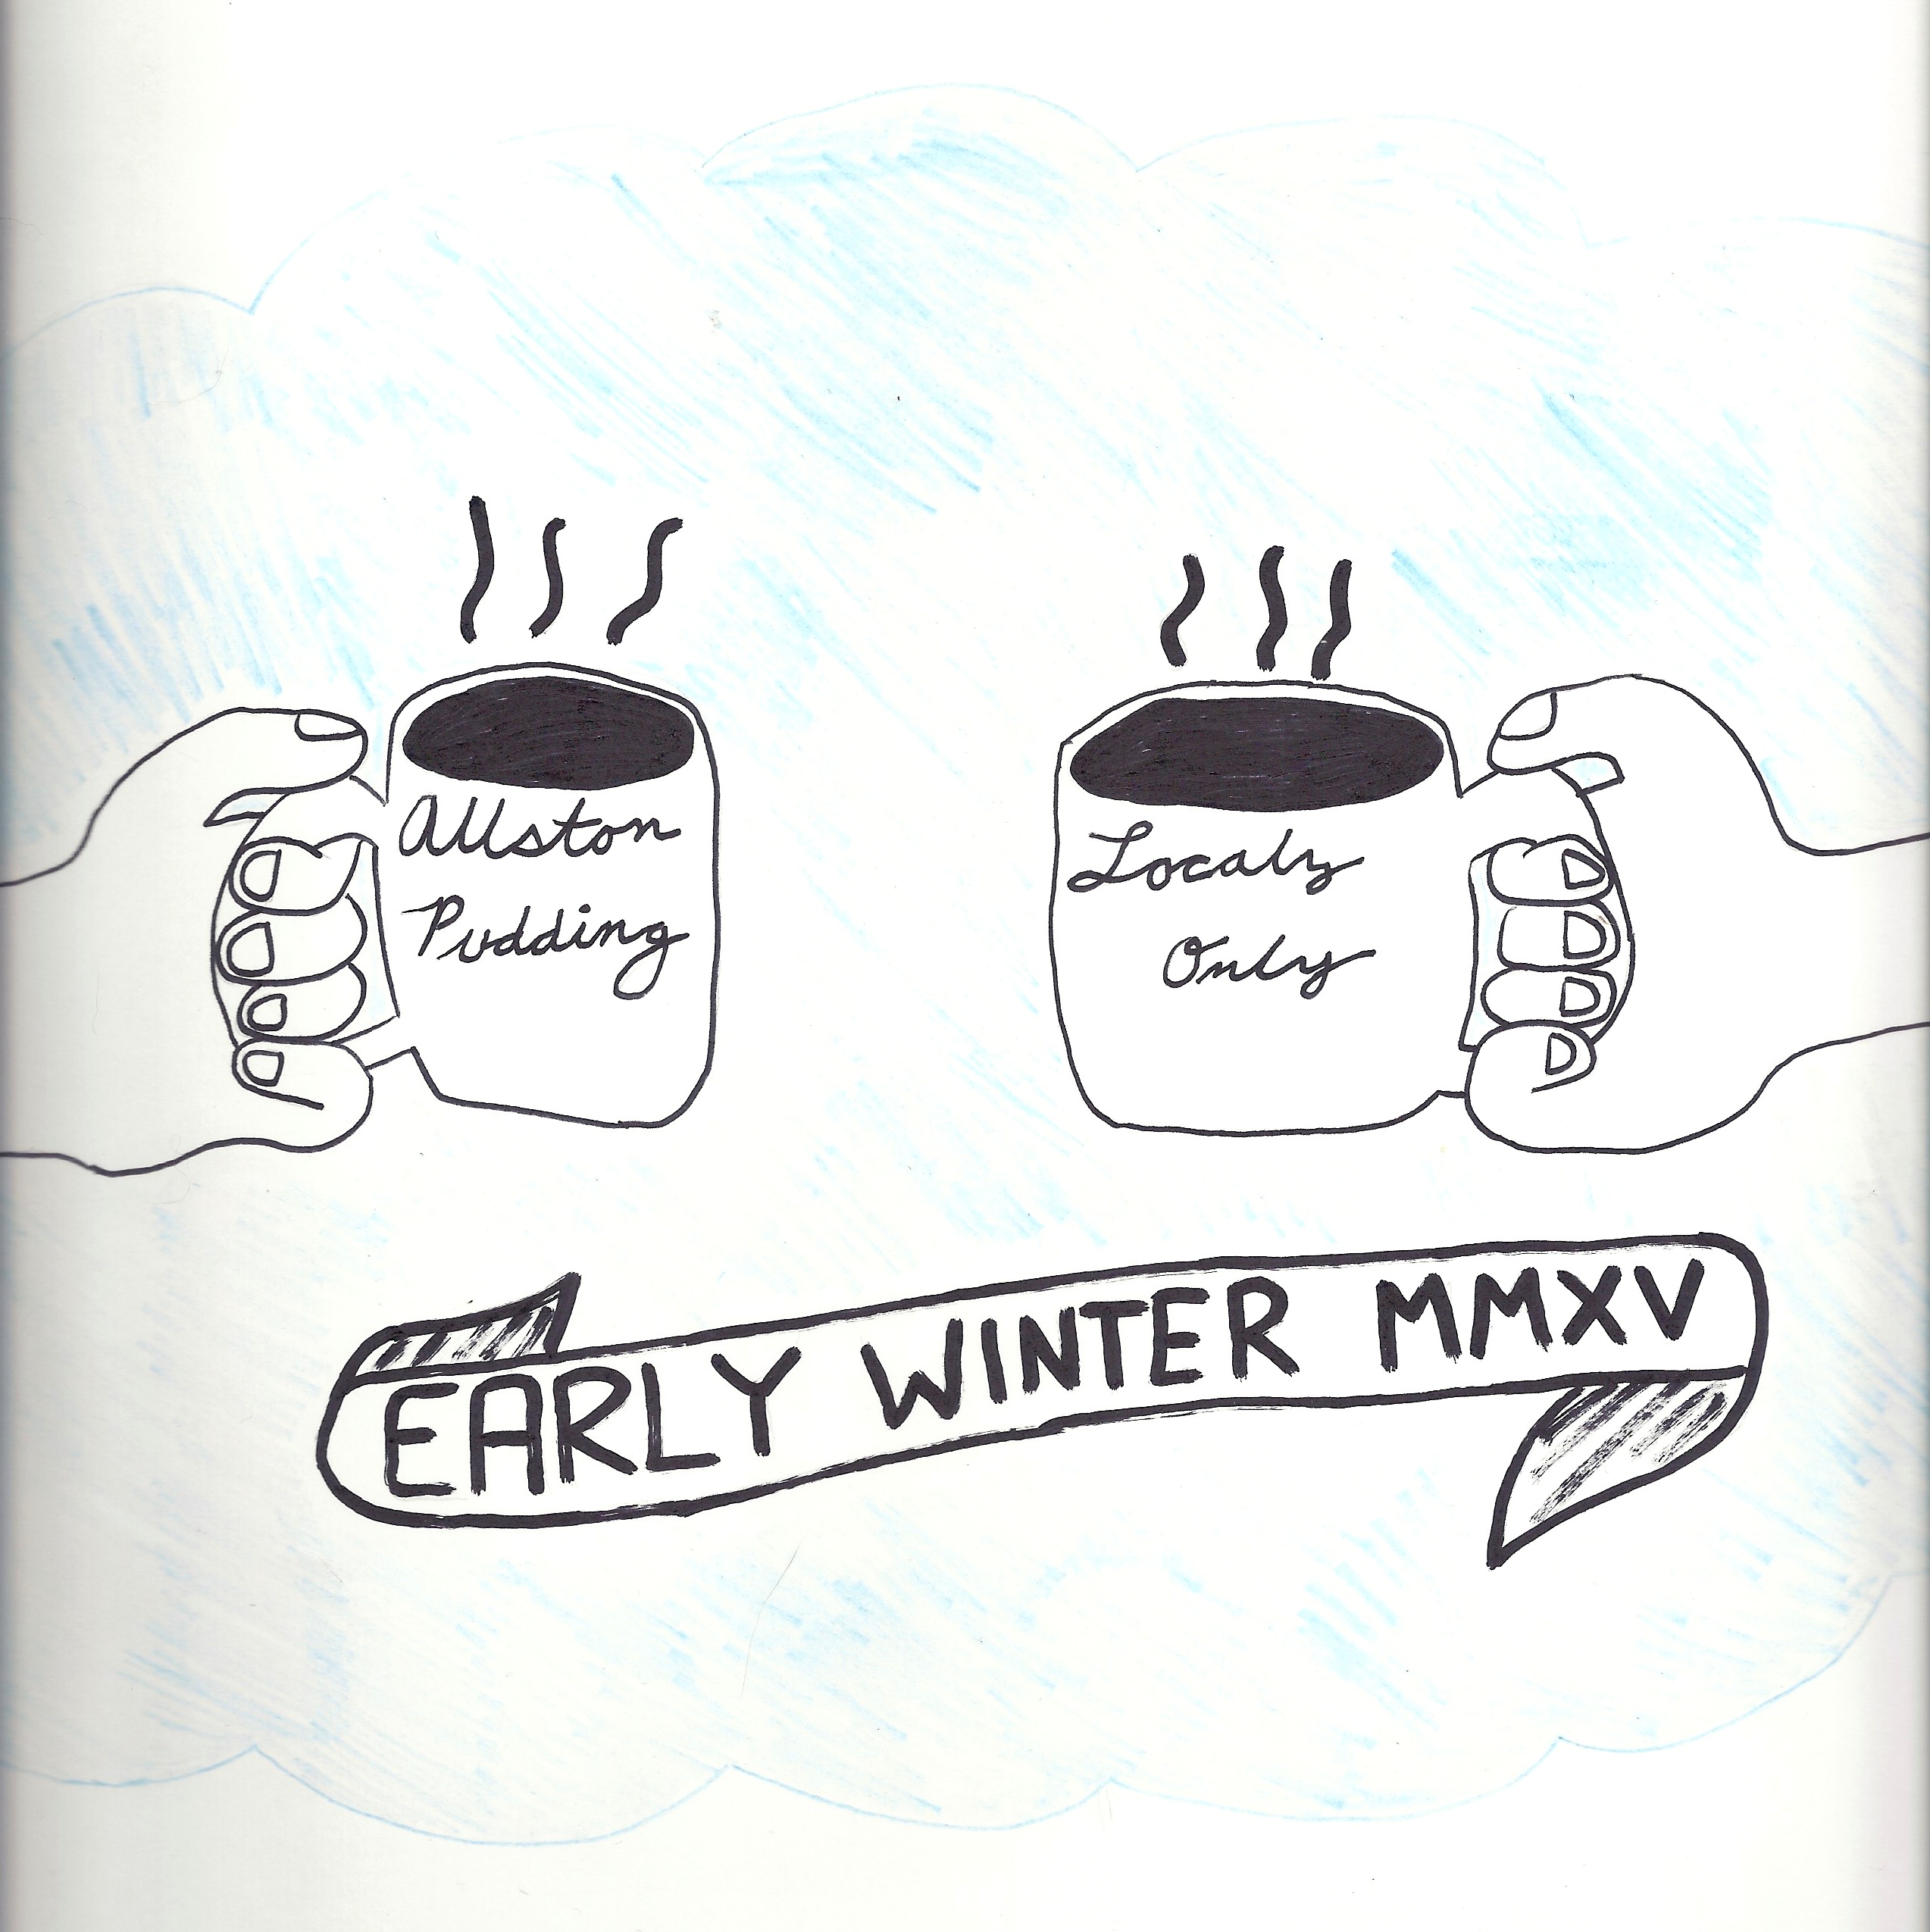 Localz Only Early Winter Mixtape 2015 - Allston Pudding